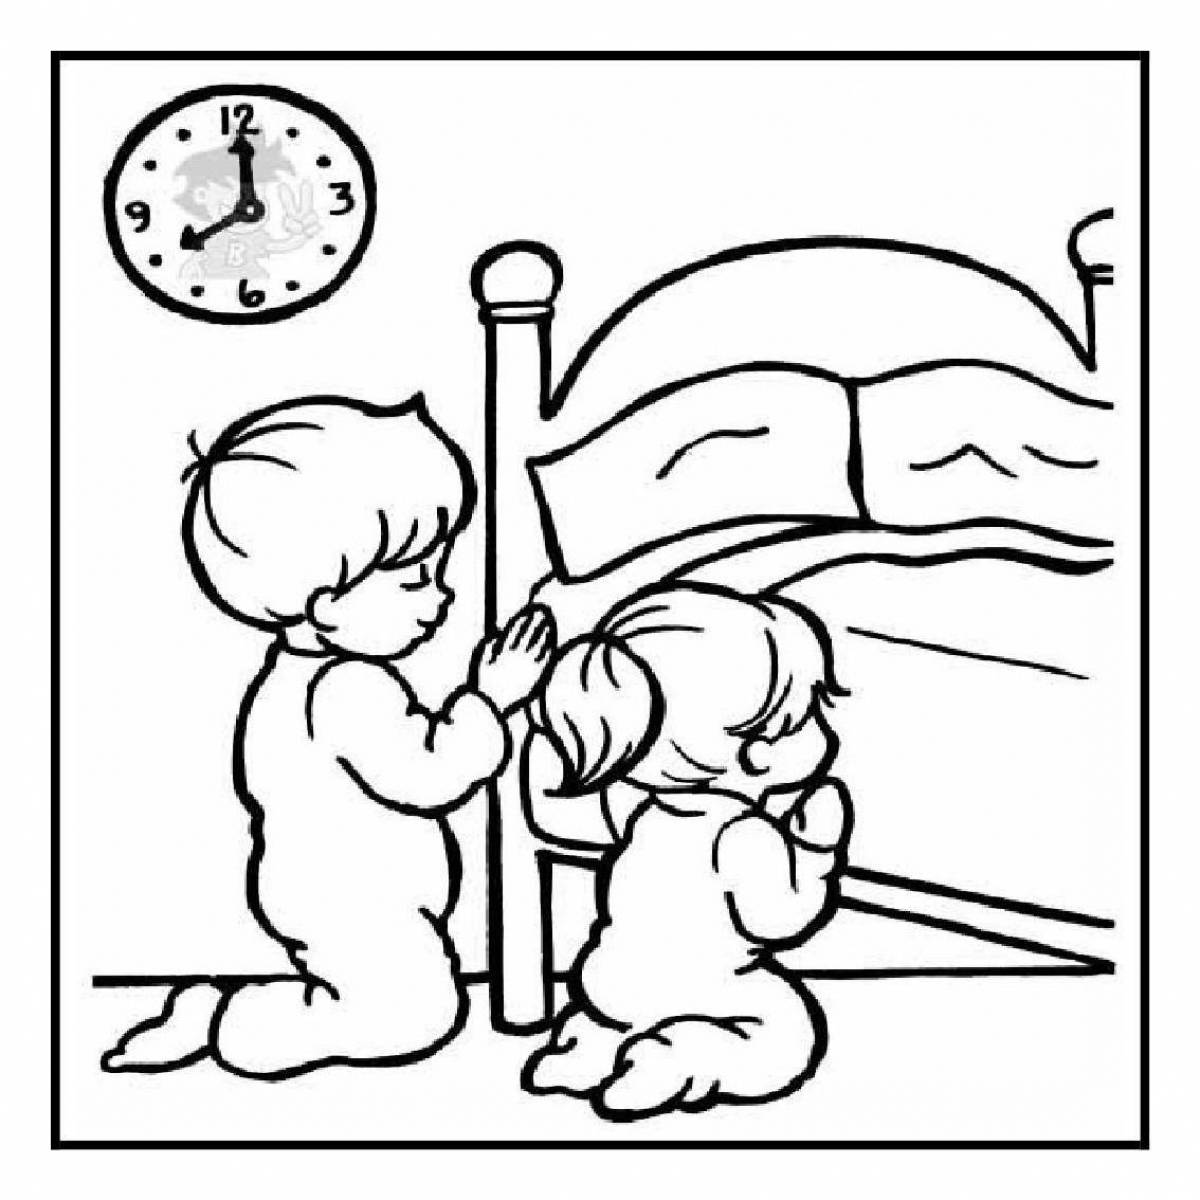 Time of day holiday coloring page